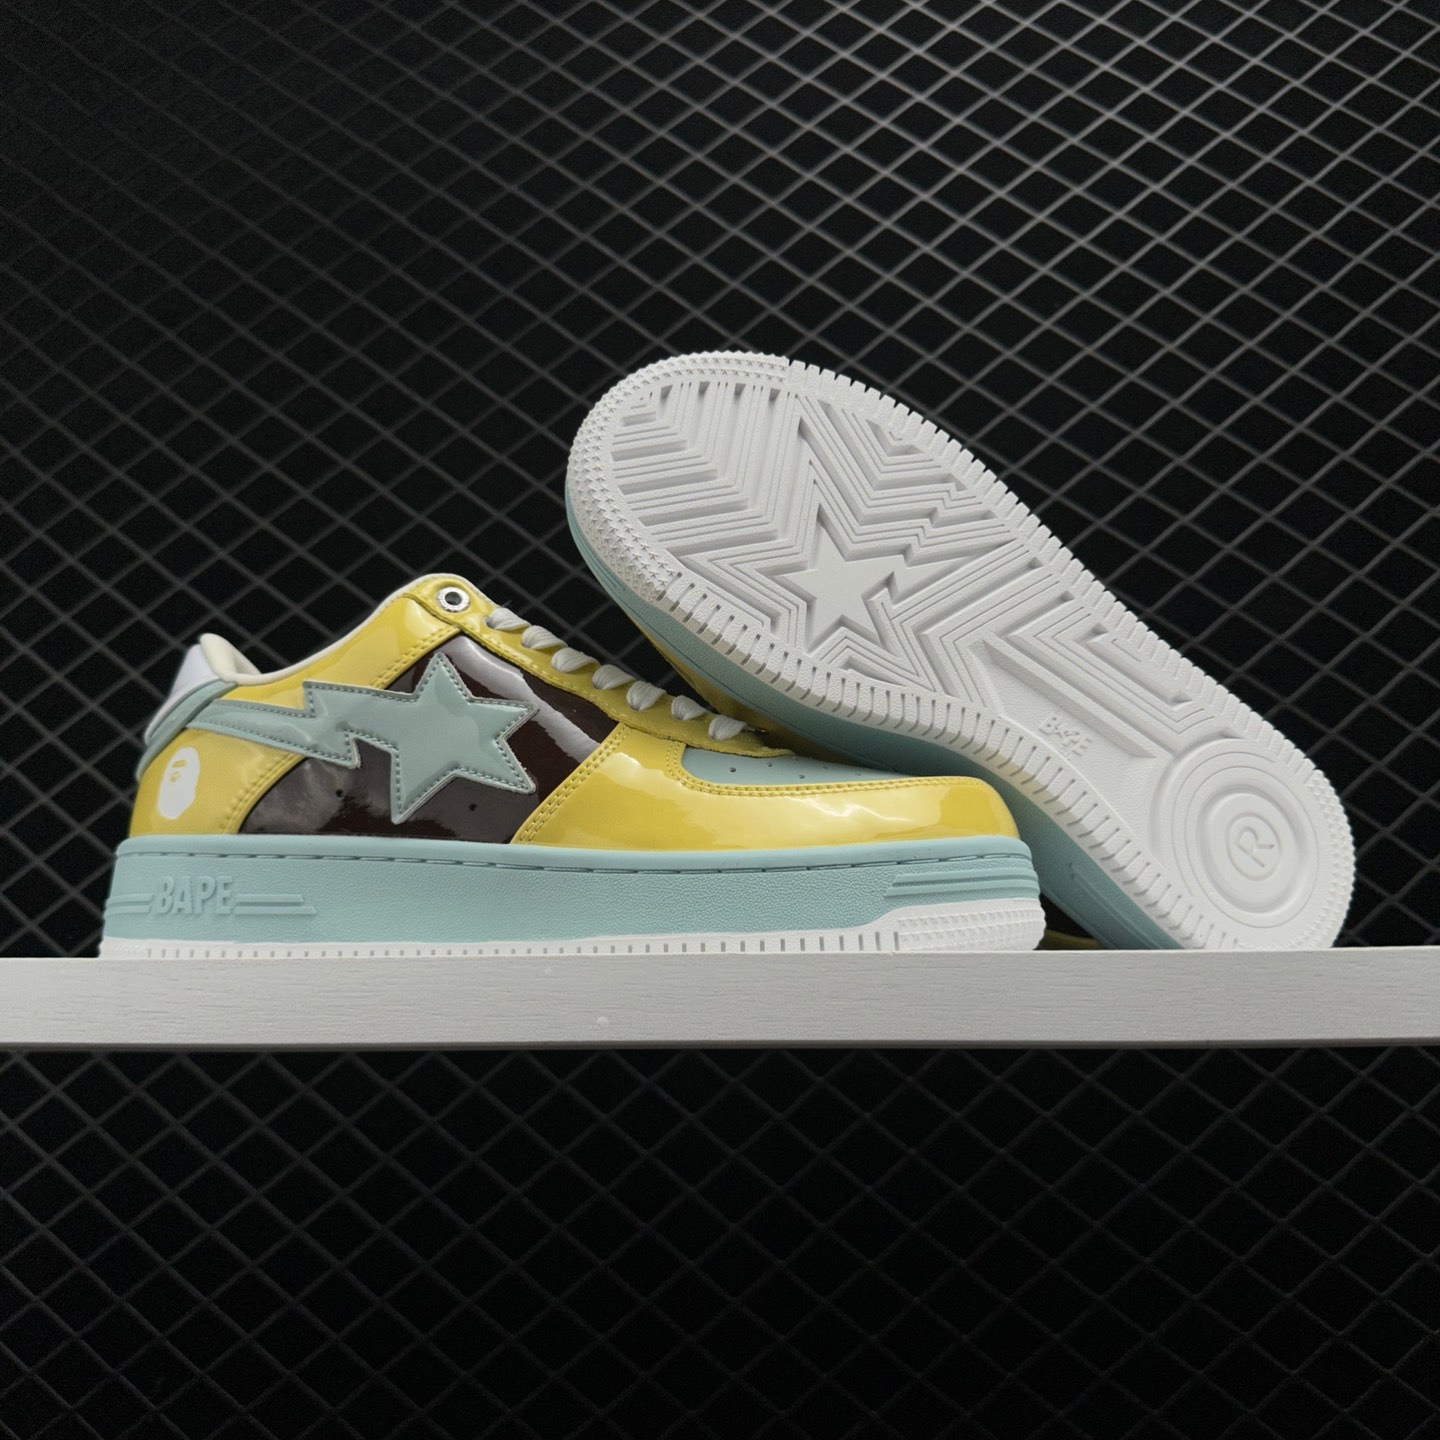 A BATHING APE Bape Sta 'Yellow Green' 1I80-191-006-YELLOW - Limited Edition Sneakers